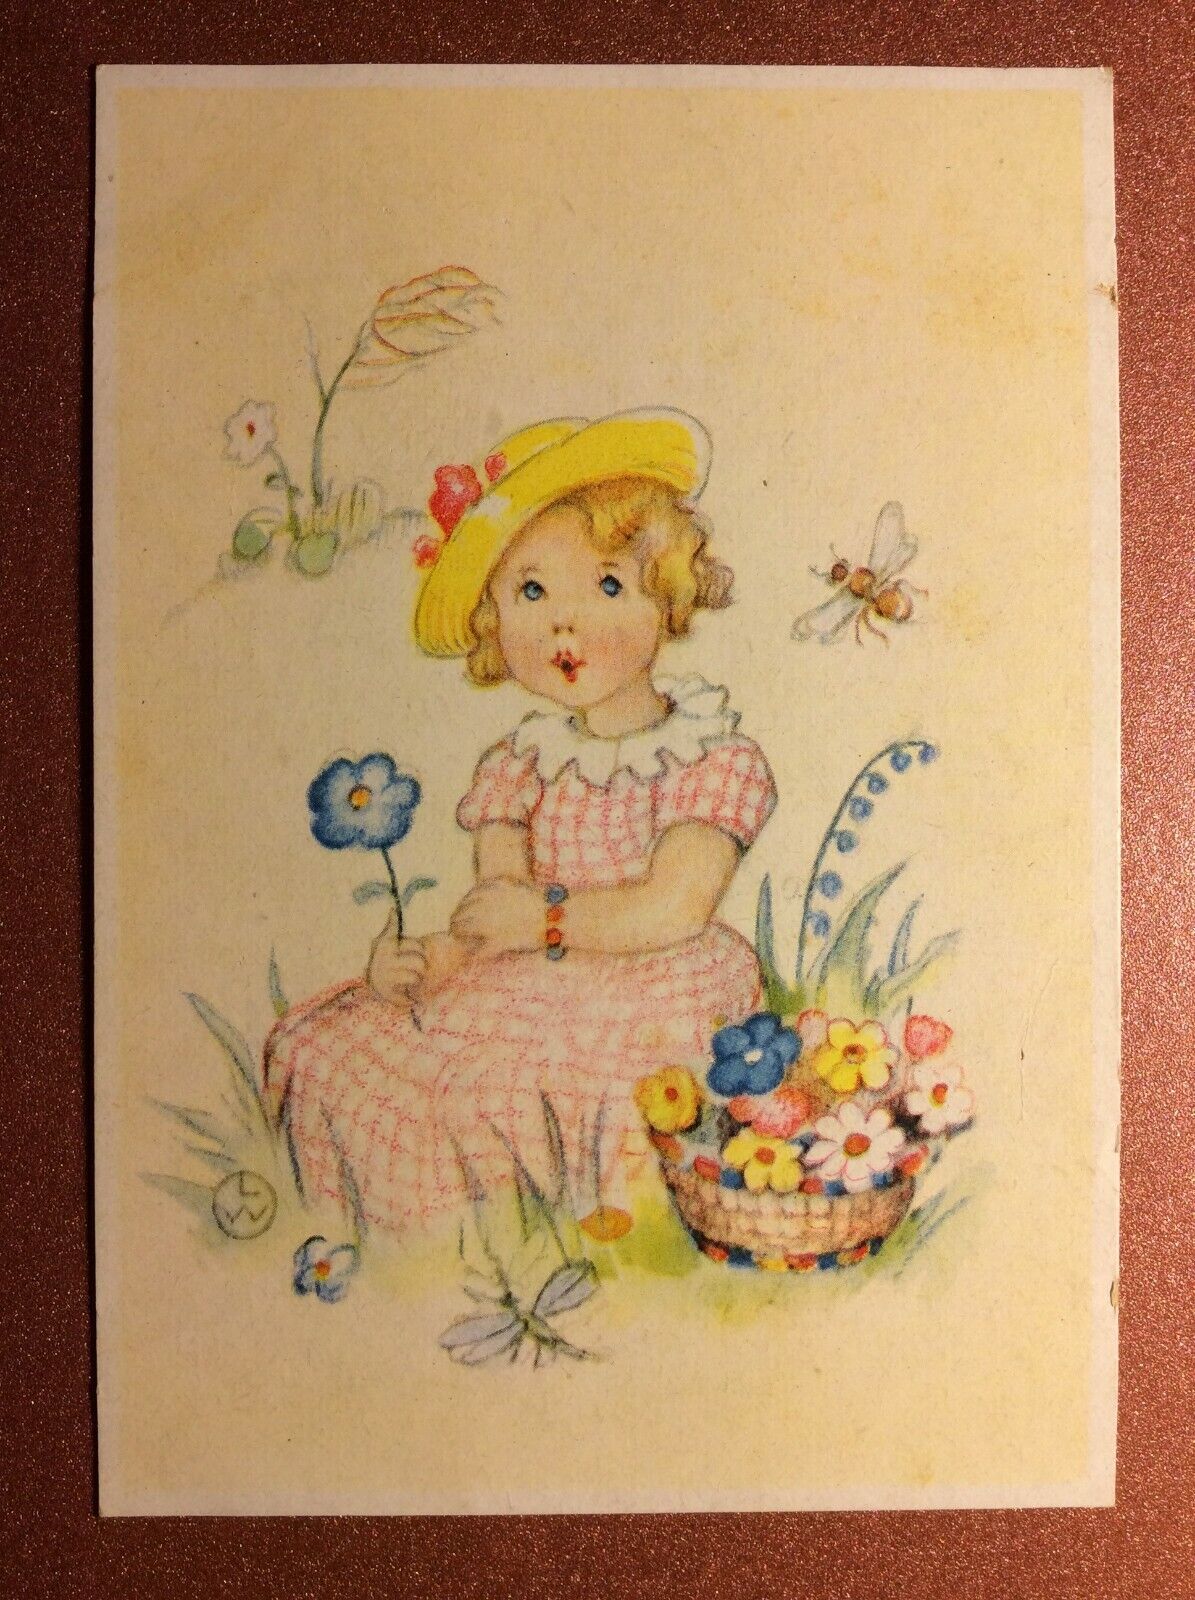 Cute Girl in straw hat. Dragonfly Bee. Artist signed LW. Germany postcard 1940s